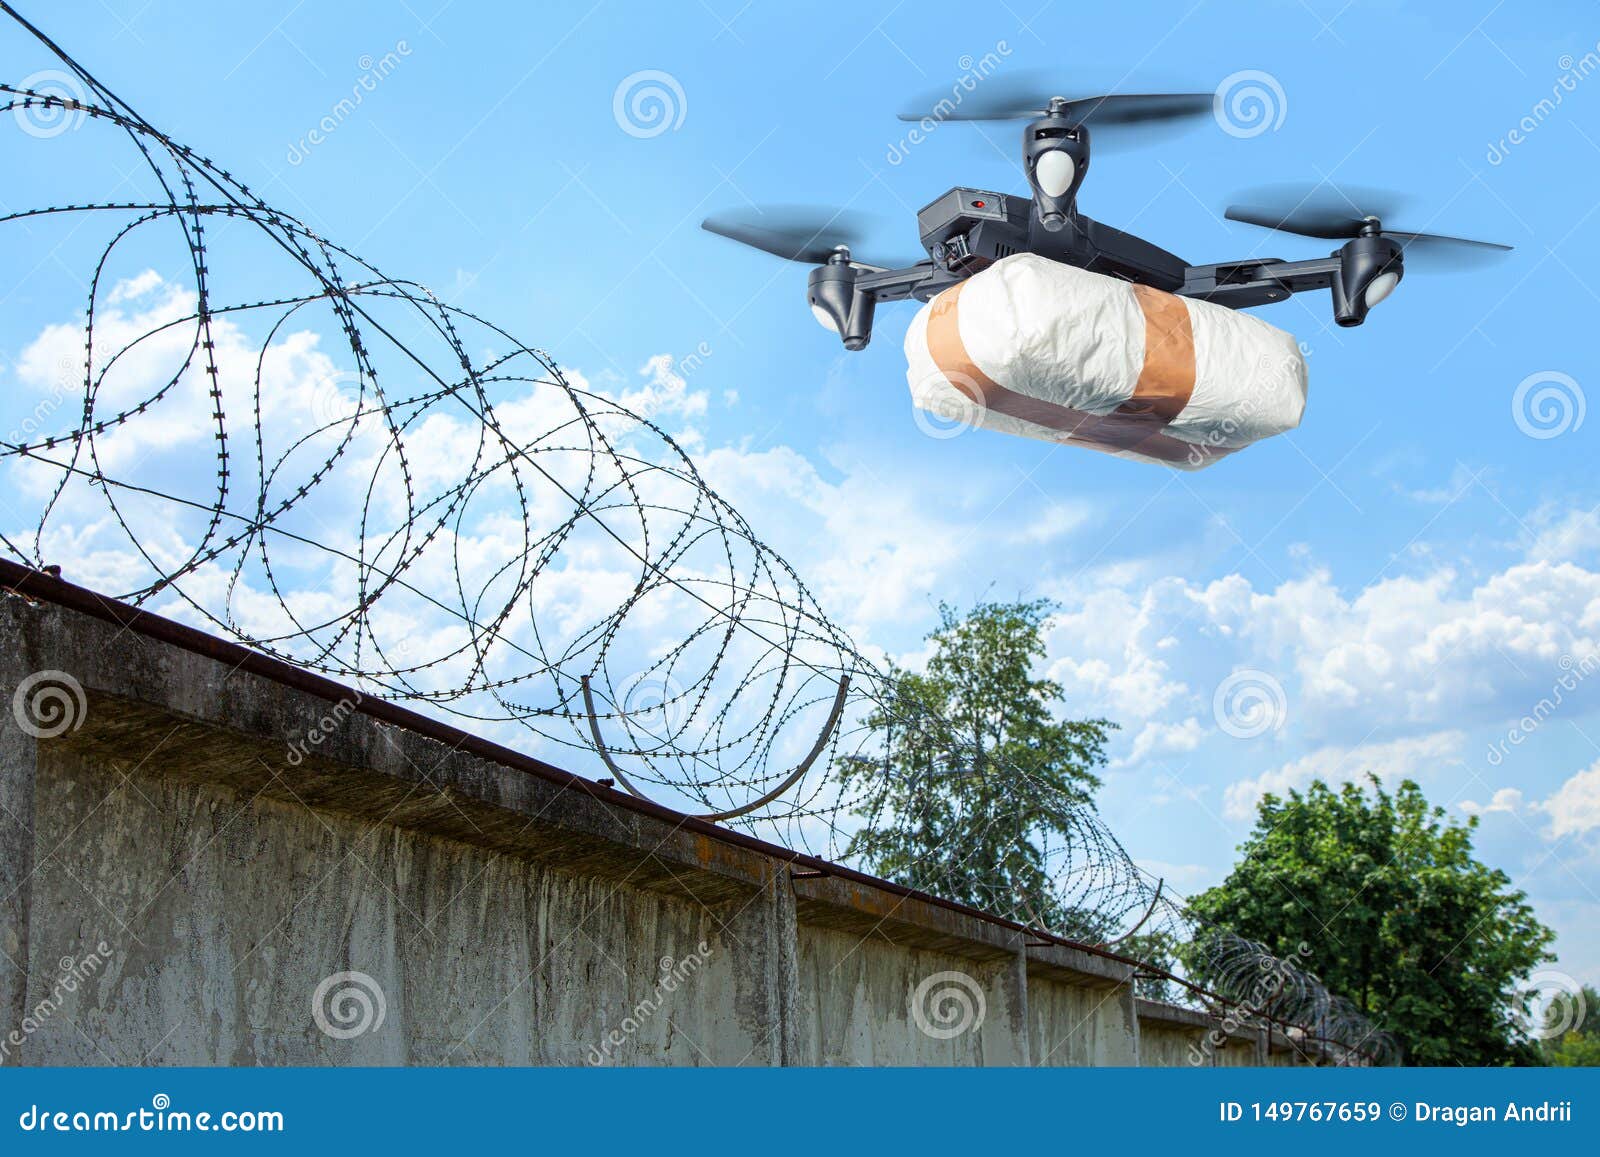 the drone flew across the sky with smuggling. the drone transports forbidden goods across the border breaking the law. delivery of